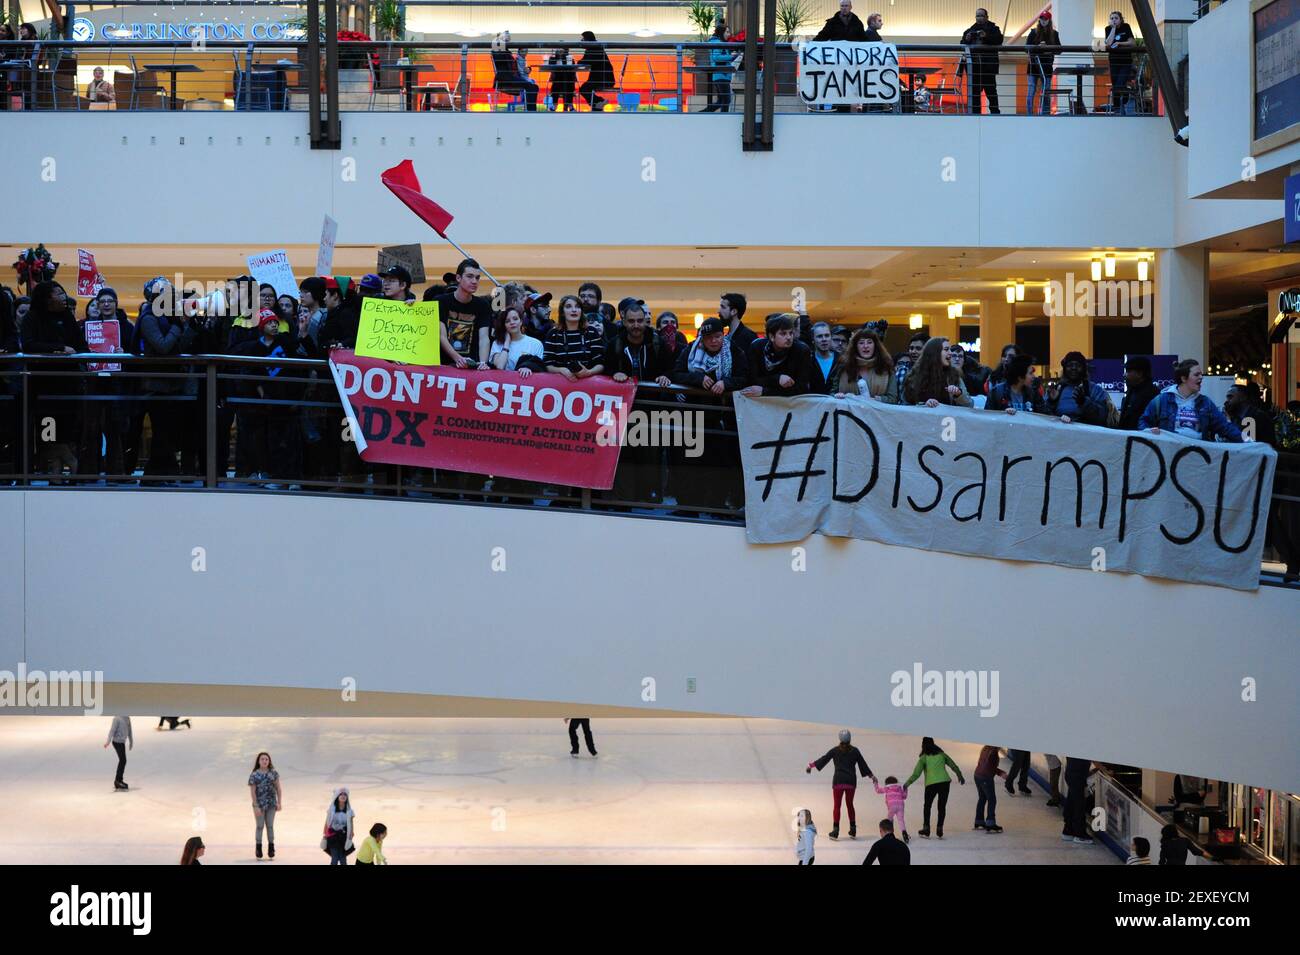 Black Lives Matter protesters demonstrate in the Lloyd Center shopping mall  in Portland, Ore., on Black